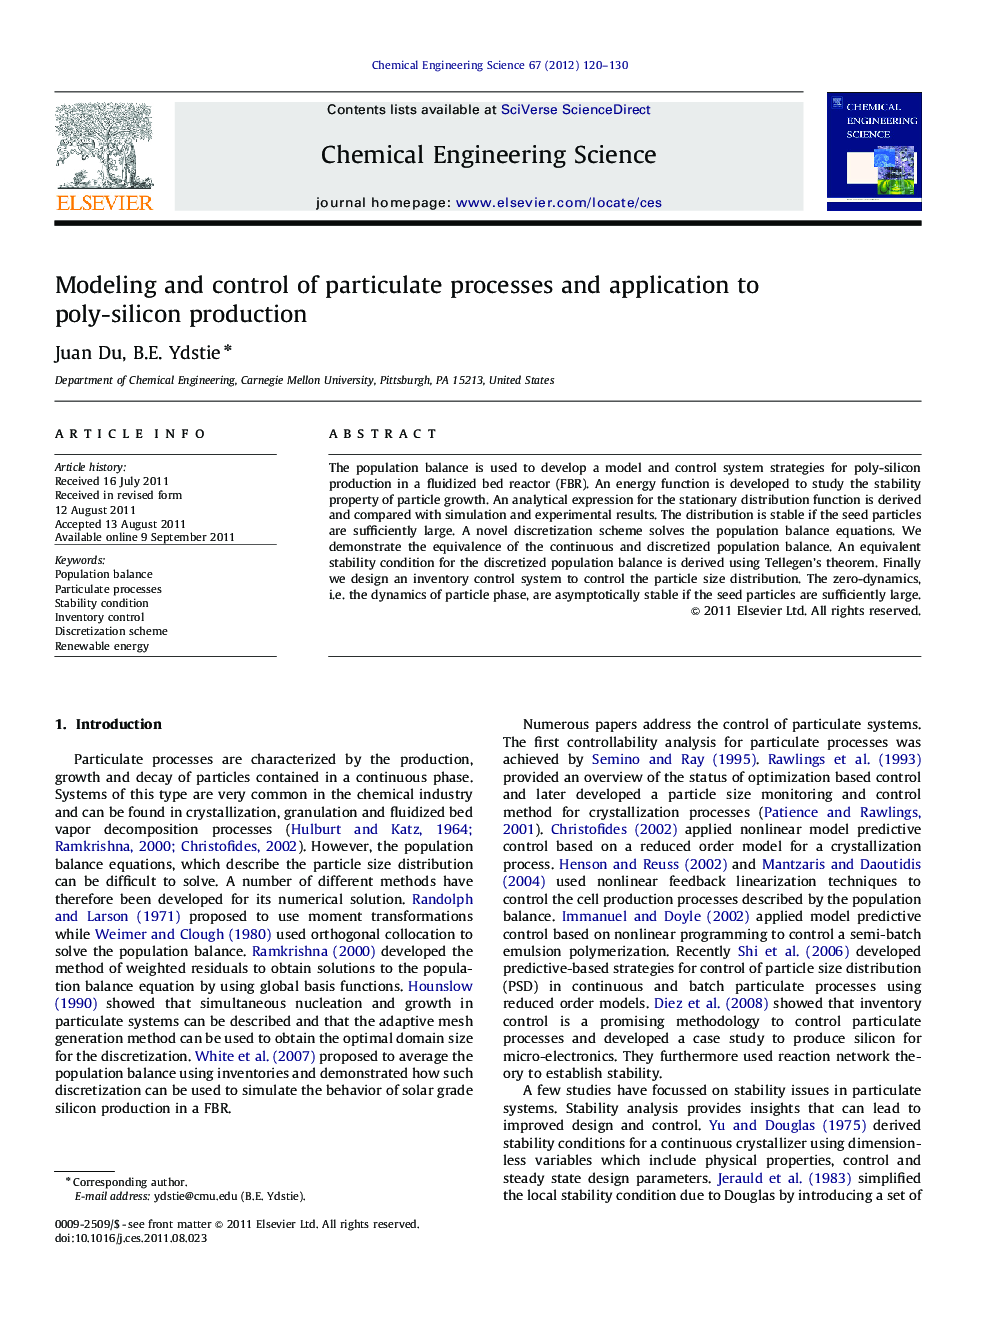 Modeling and control of particulate processes and application to poly-silicon production